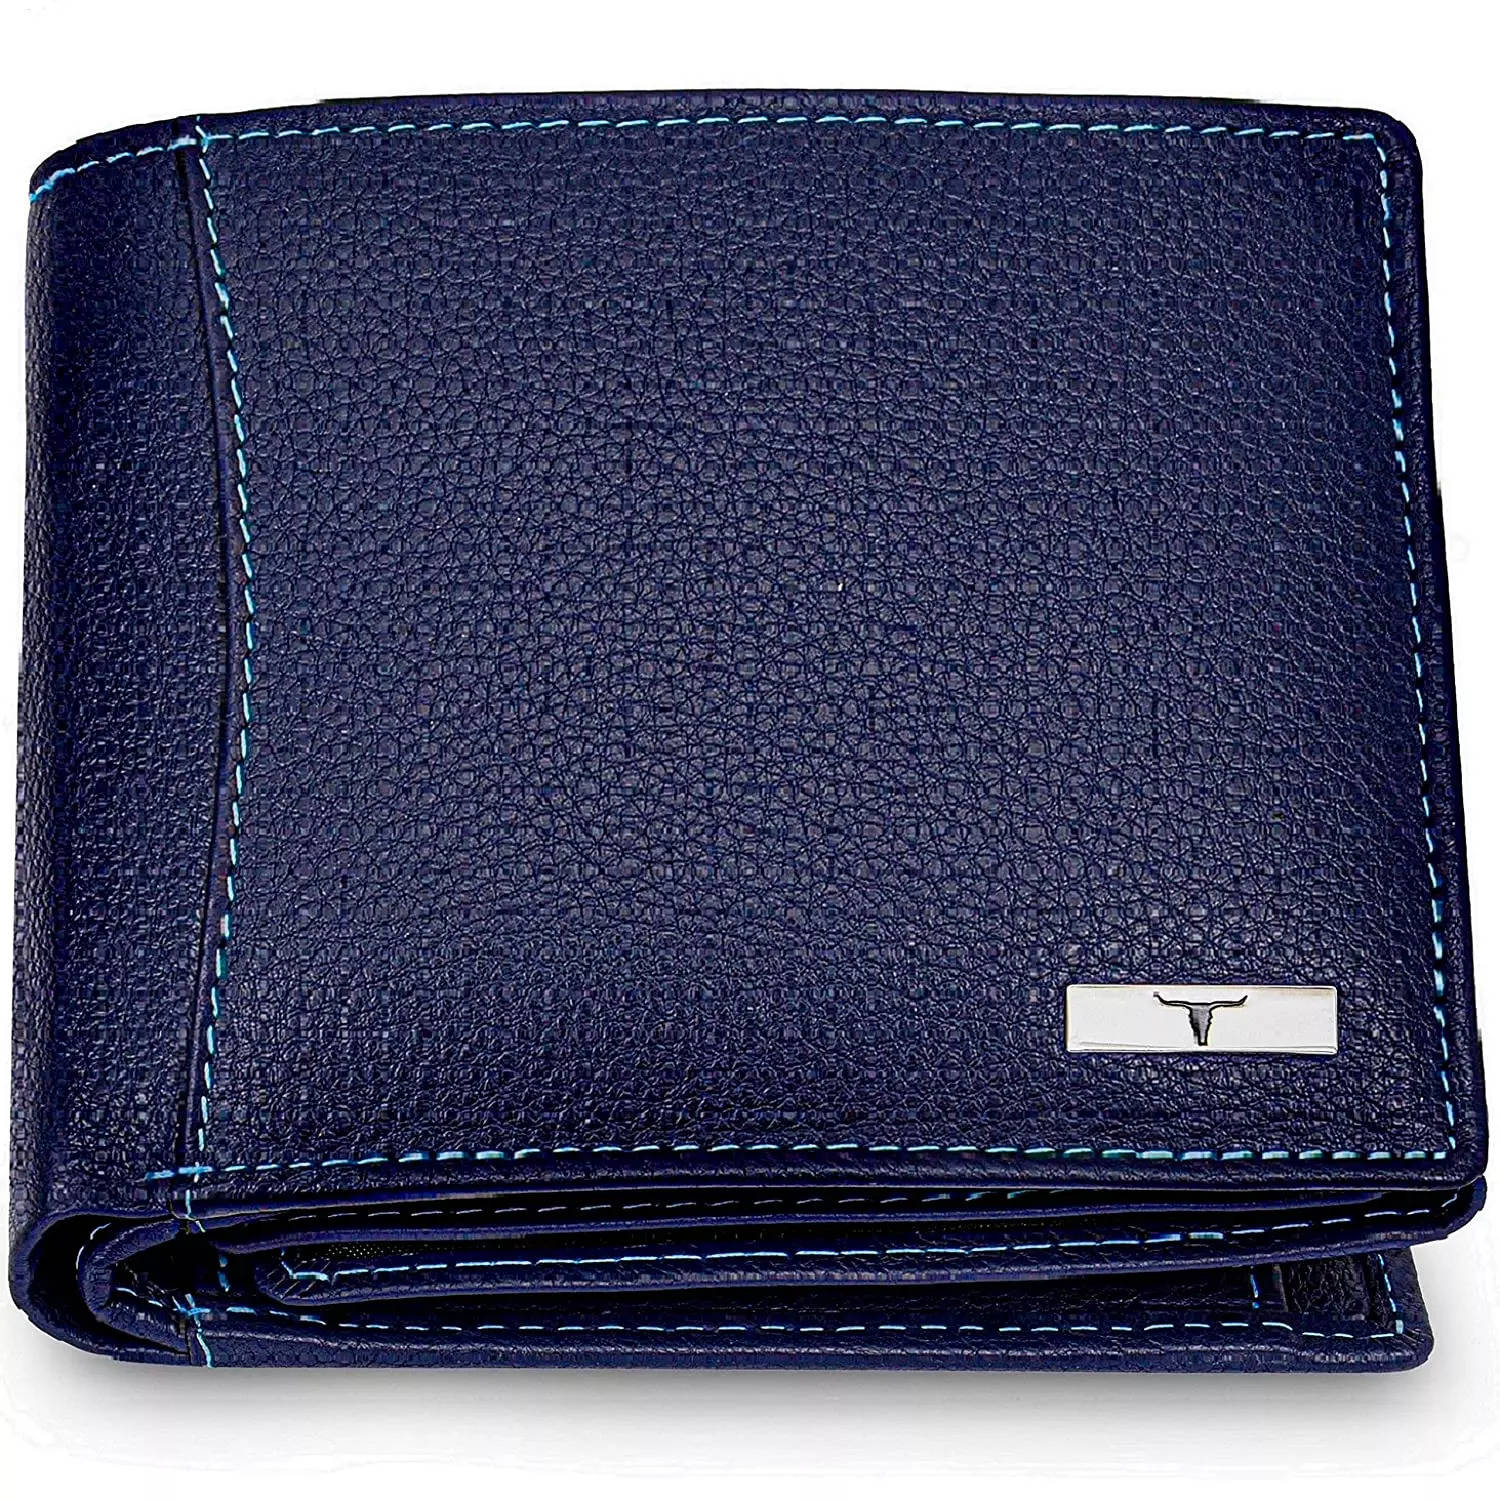 Men’s wallet: Buy Stylish Wallets for Men at Best Prices on Amazon ...